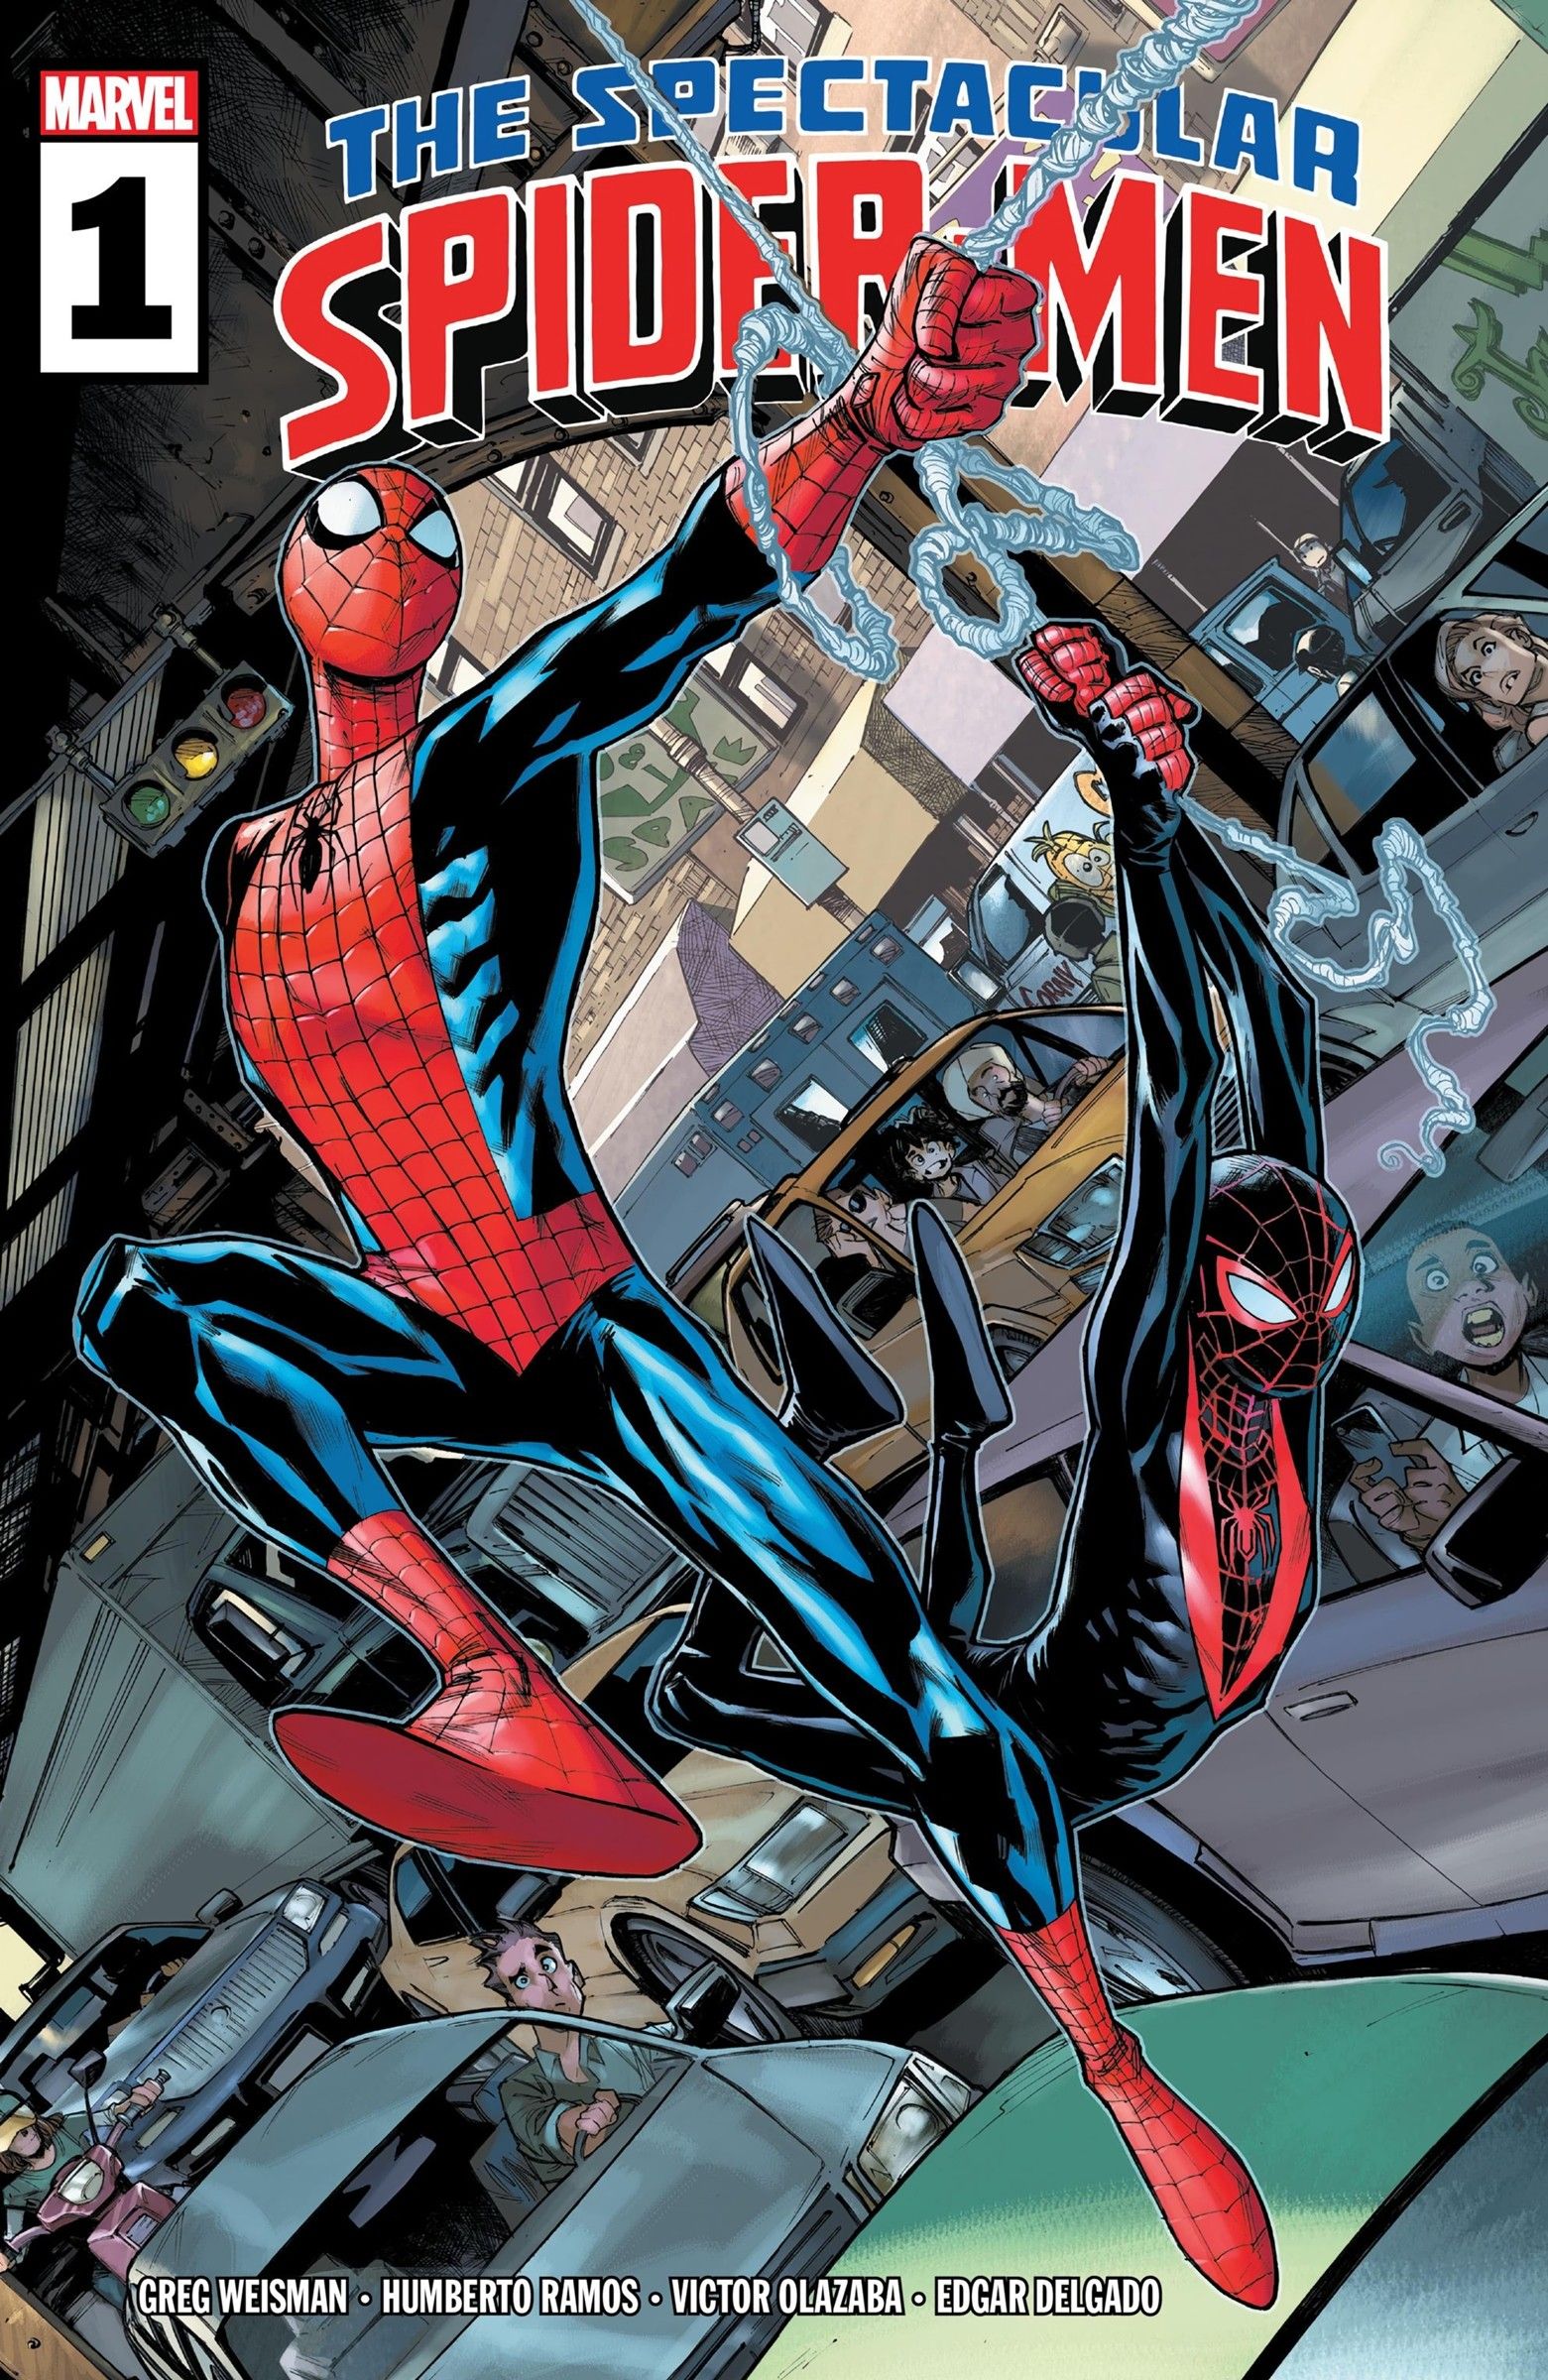 Spectacular Spider-Men #1 cover featuring Peter and Miles swinging into action